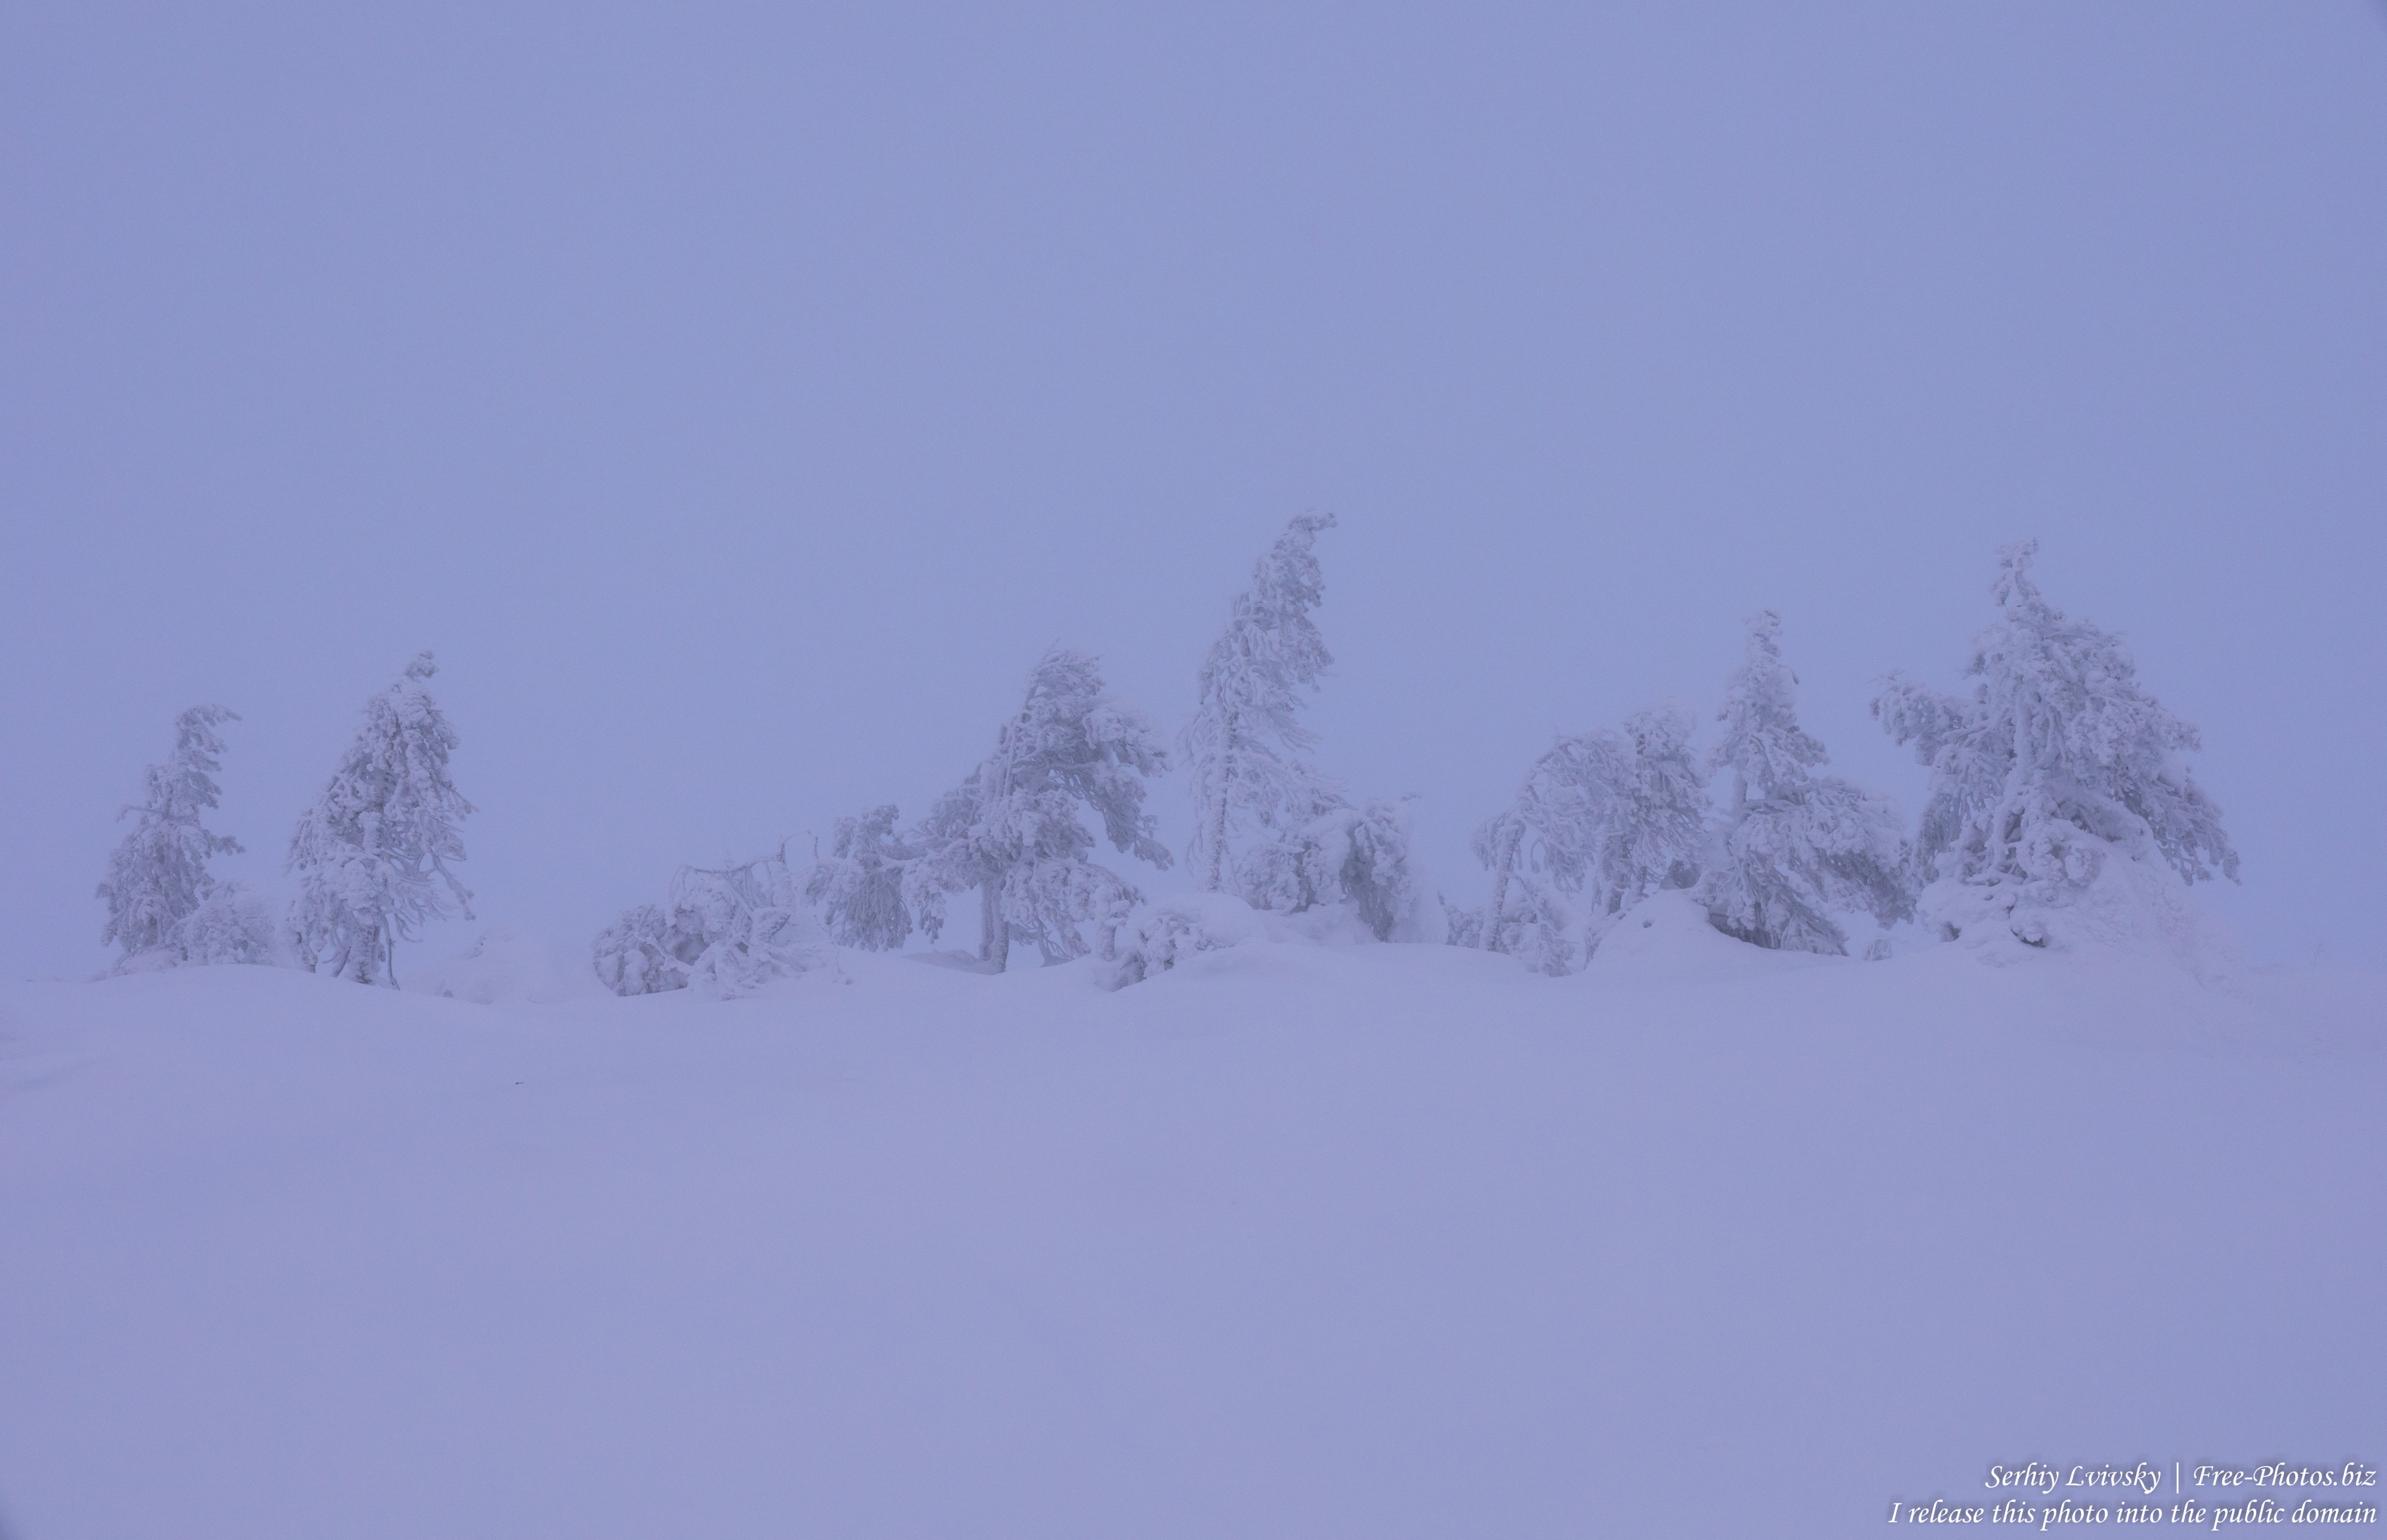 Sallatunturi, Finland, photographed in January 2020 by Serhiy Lvivsky, picture 11